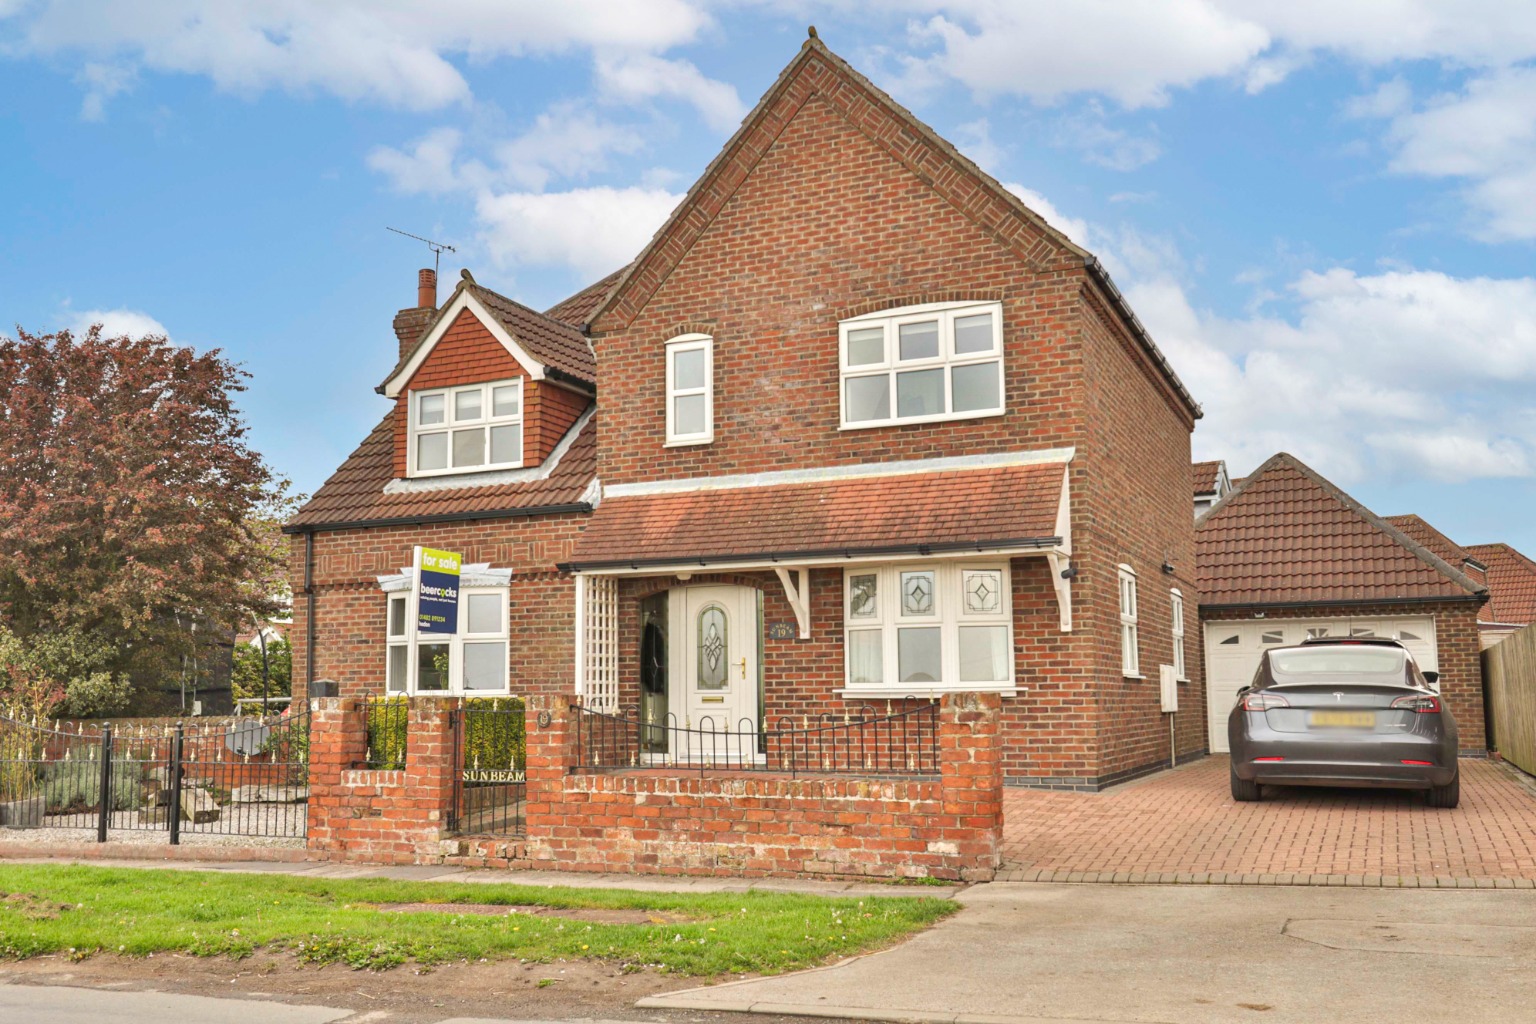 4 bed detached house for sale in Southside, Hull - Property Image 1